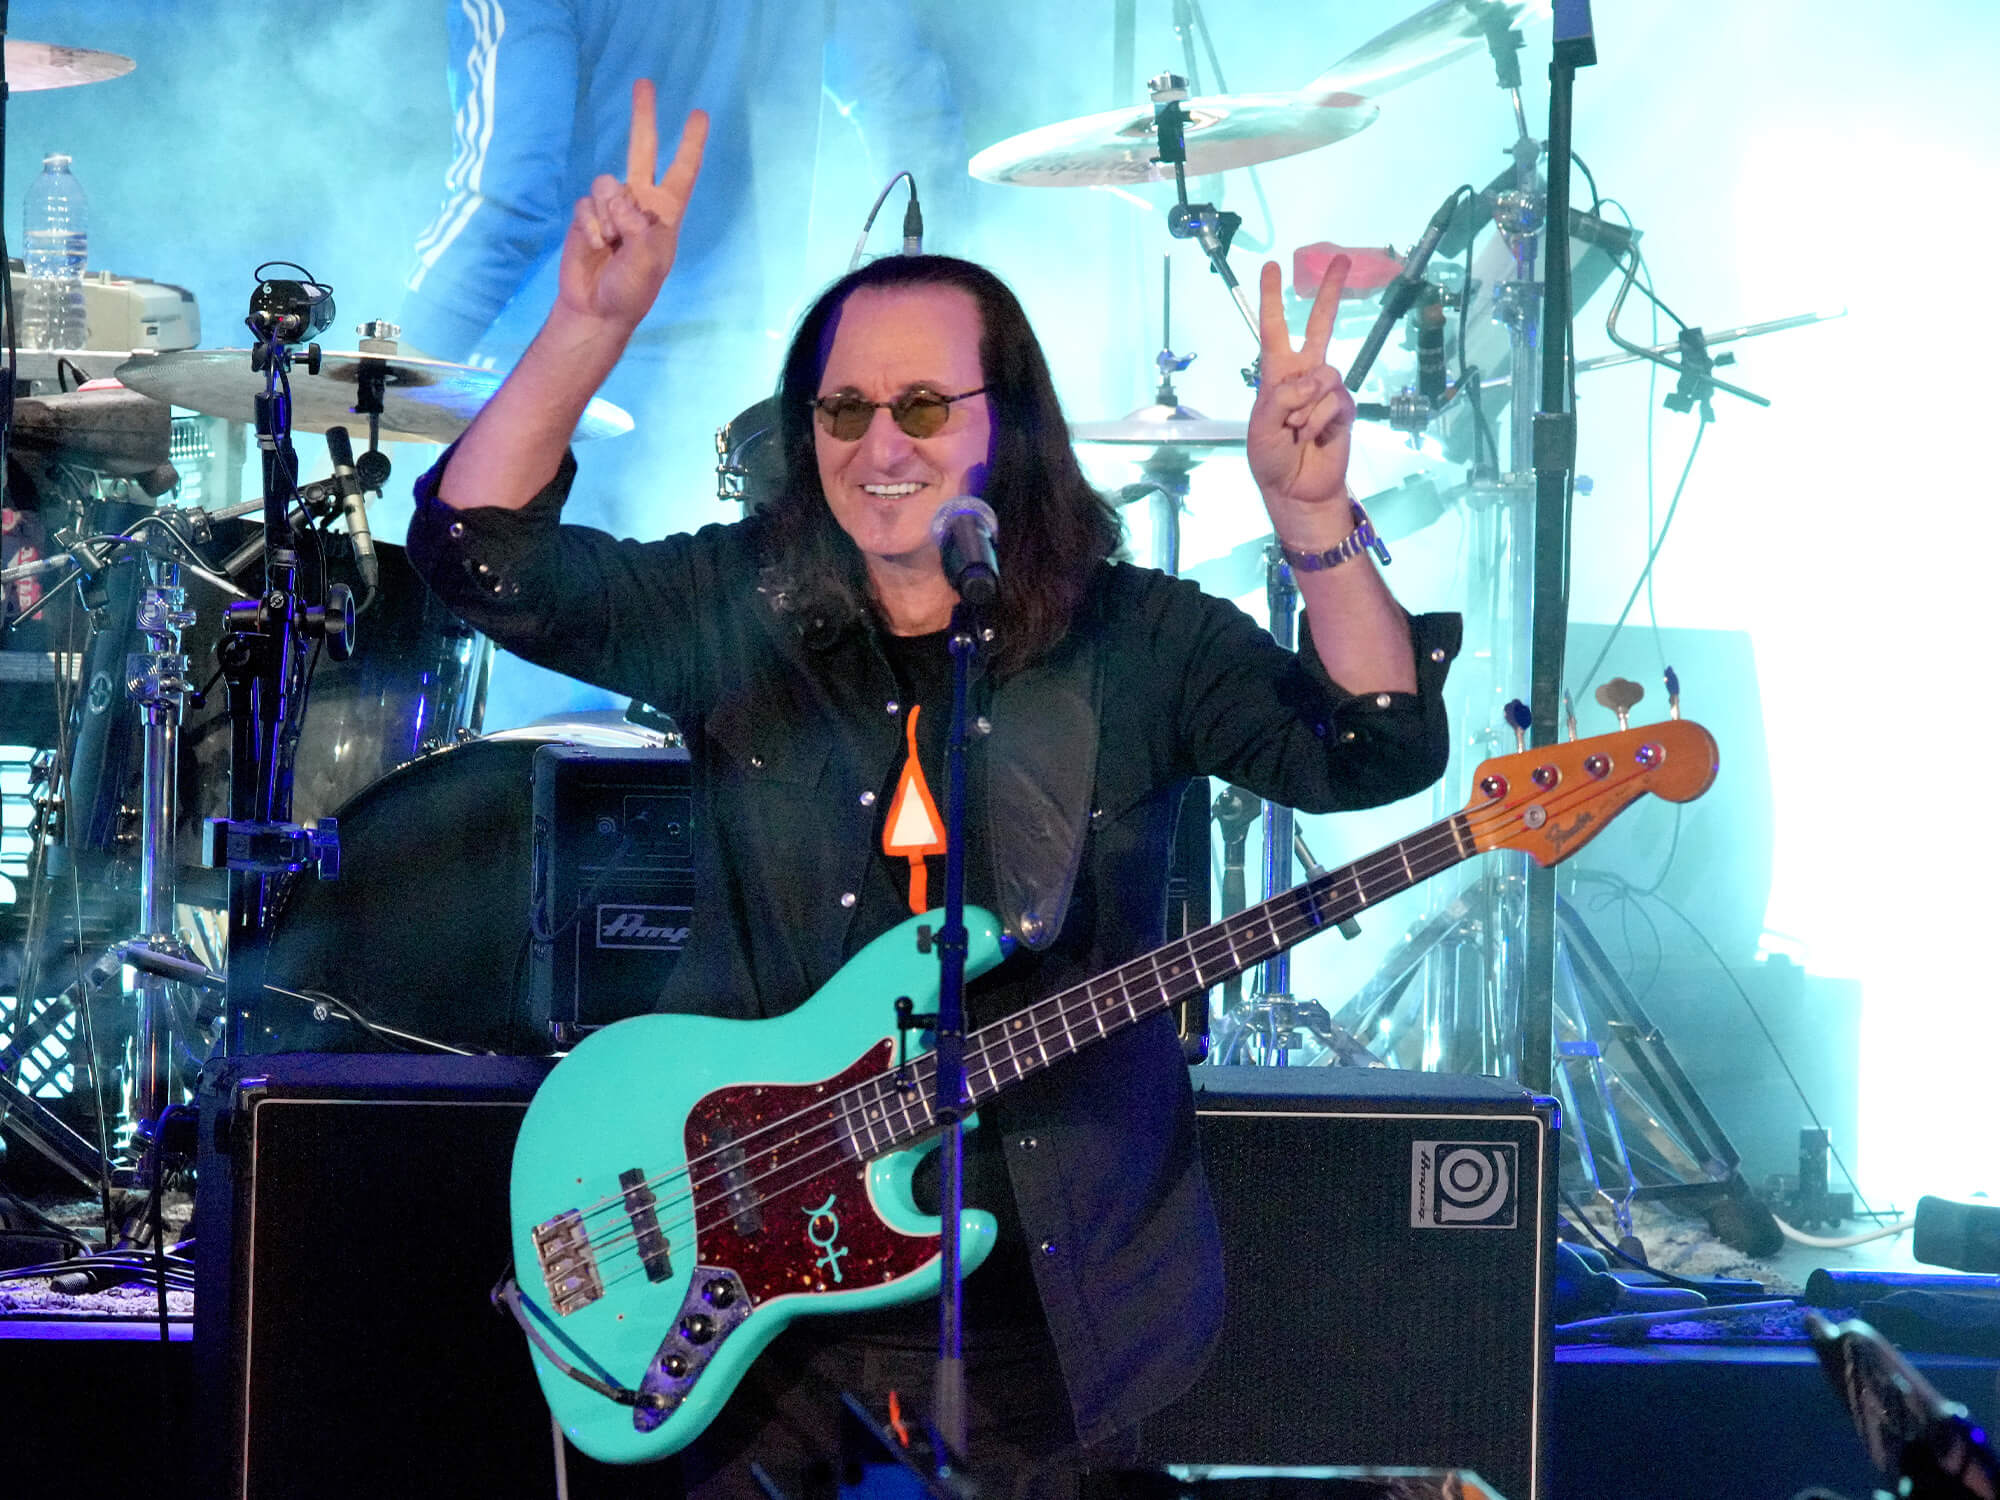 Geddy Lee on stage. He has a bass guitar hanging at his torso and is smiling and holding up two peace signs with his hands.